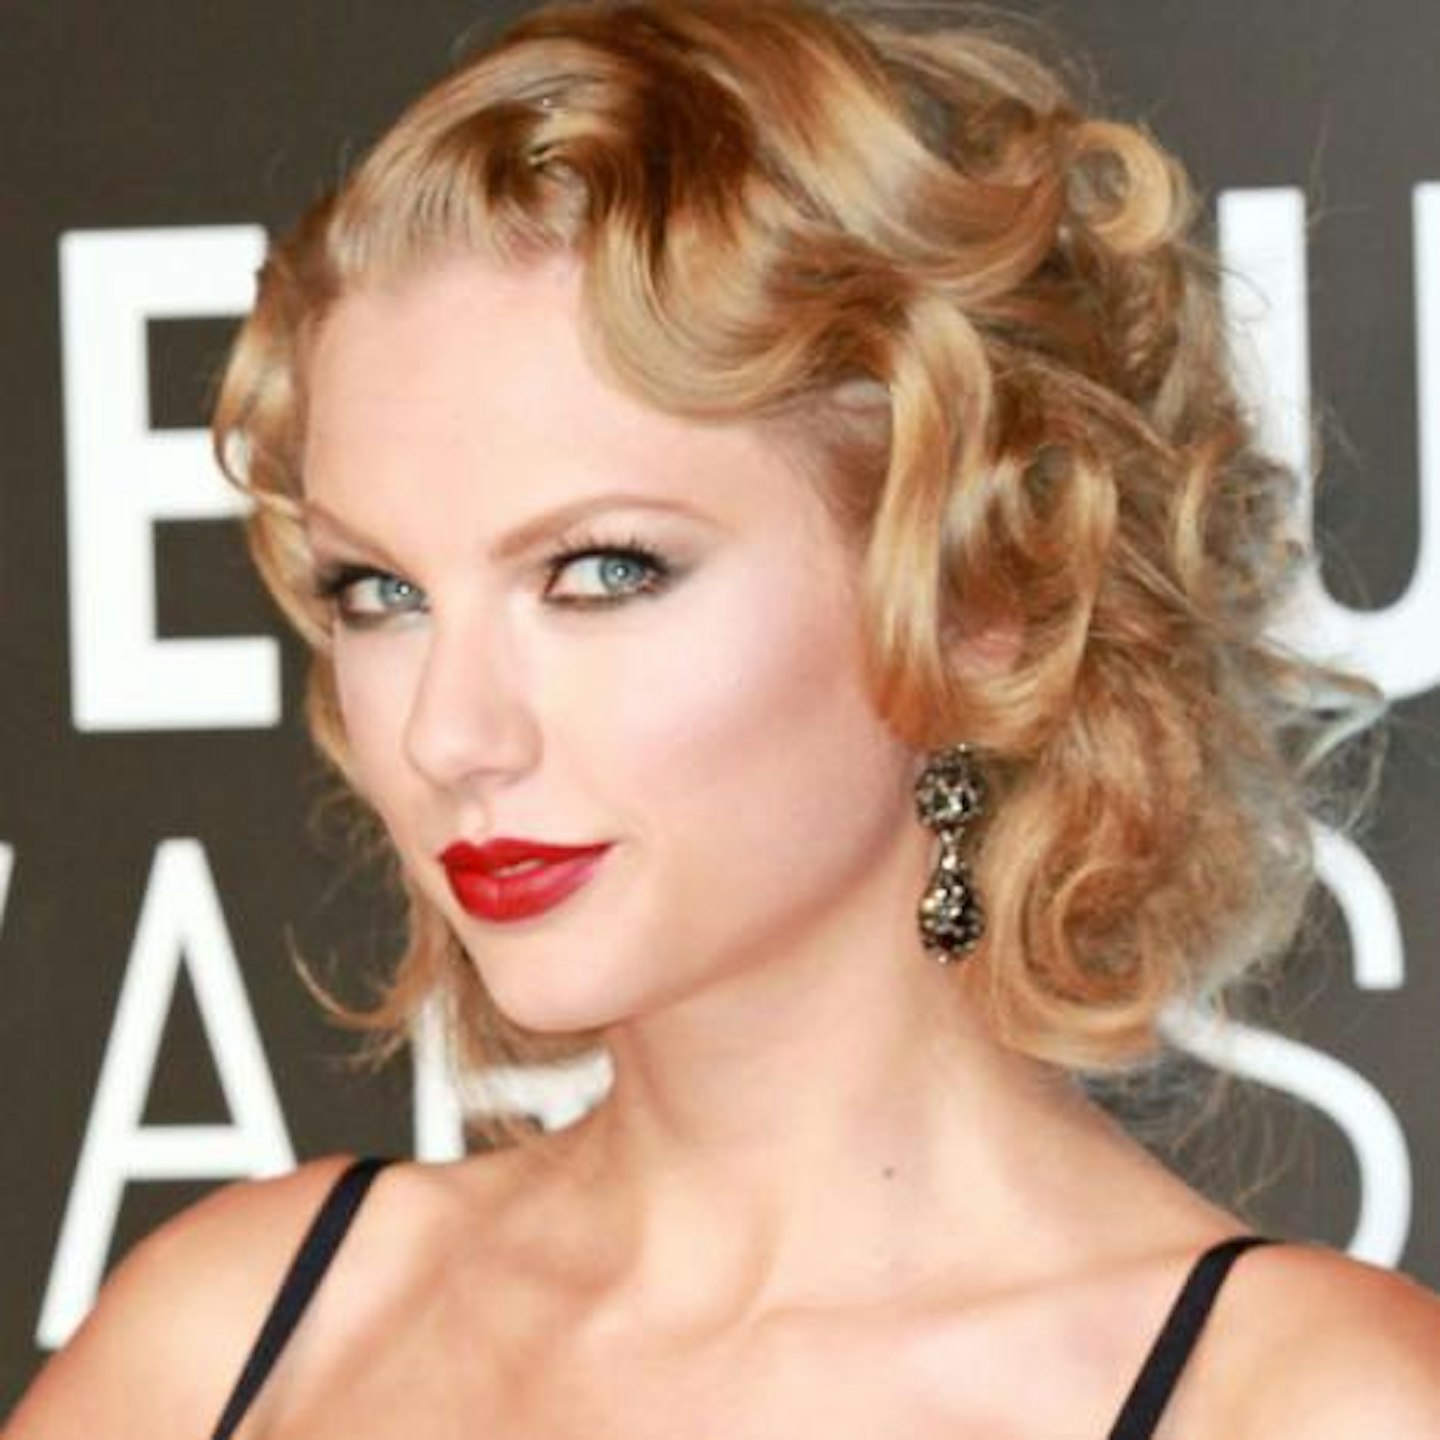 Taylor Swift already has the Hollywood glamour look down pat